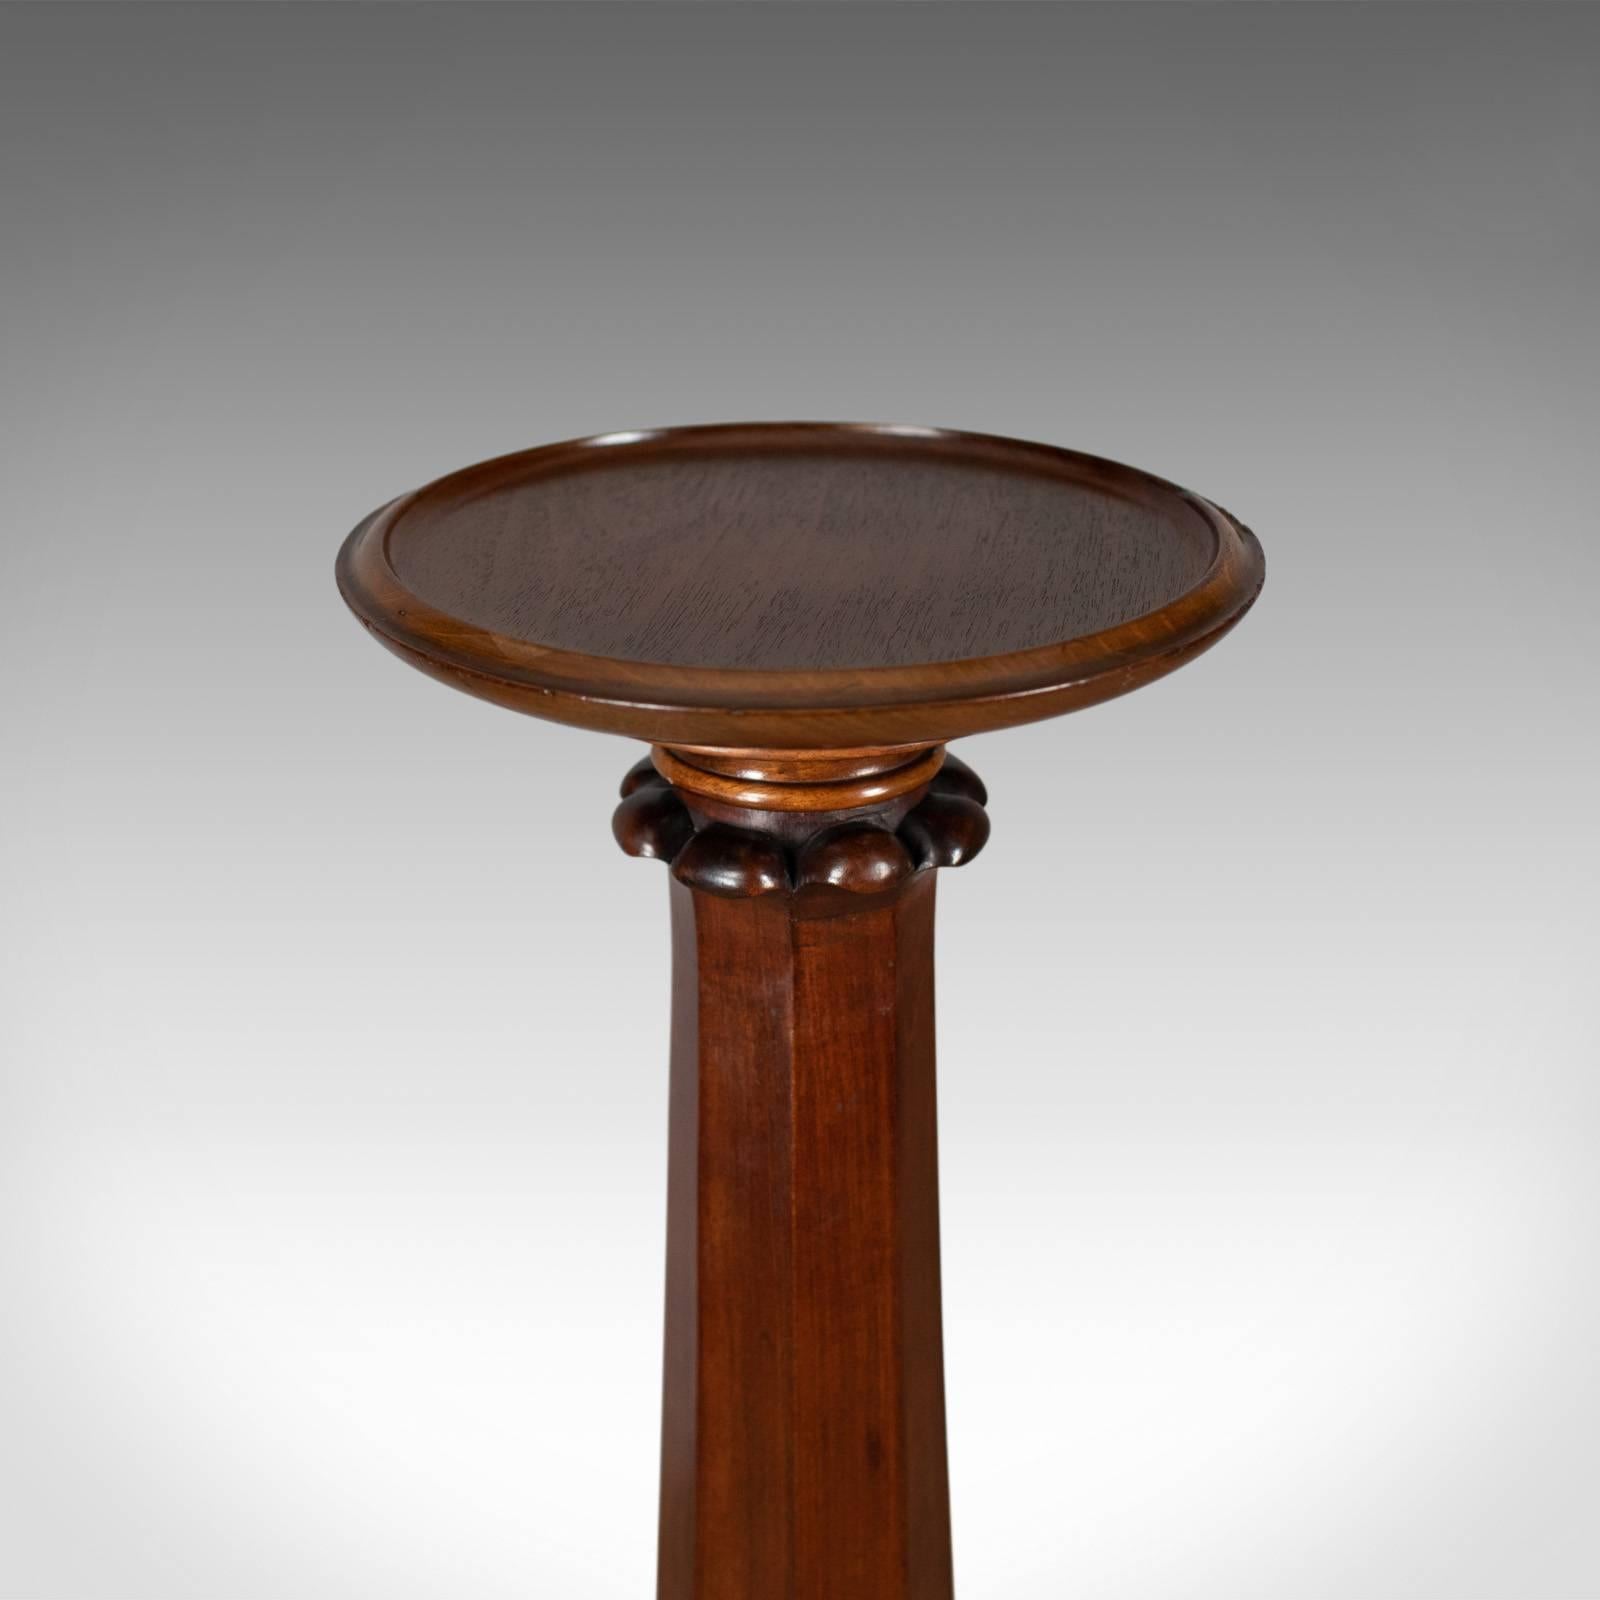 This is an antique torchere, an English, William IV plant stand in mahogany dating to circa 1835.

Attractive color and graining to the solid mahogany
Of quality craftsmanship with a desirable aged patina
Offering a weighty, solid, robust and